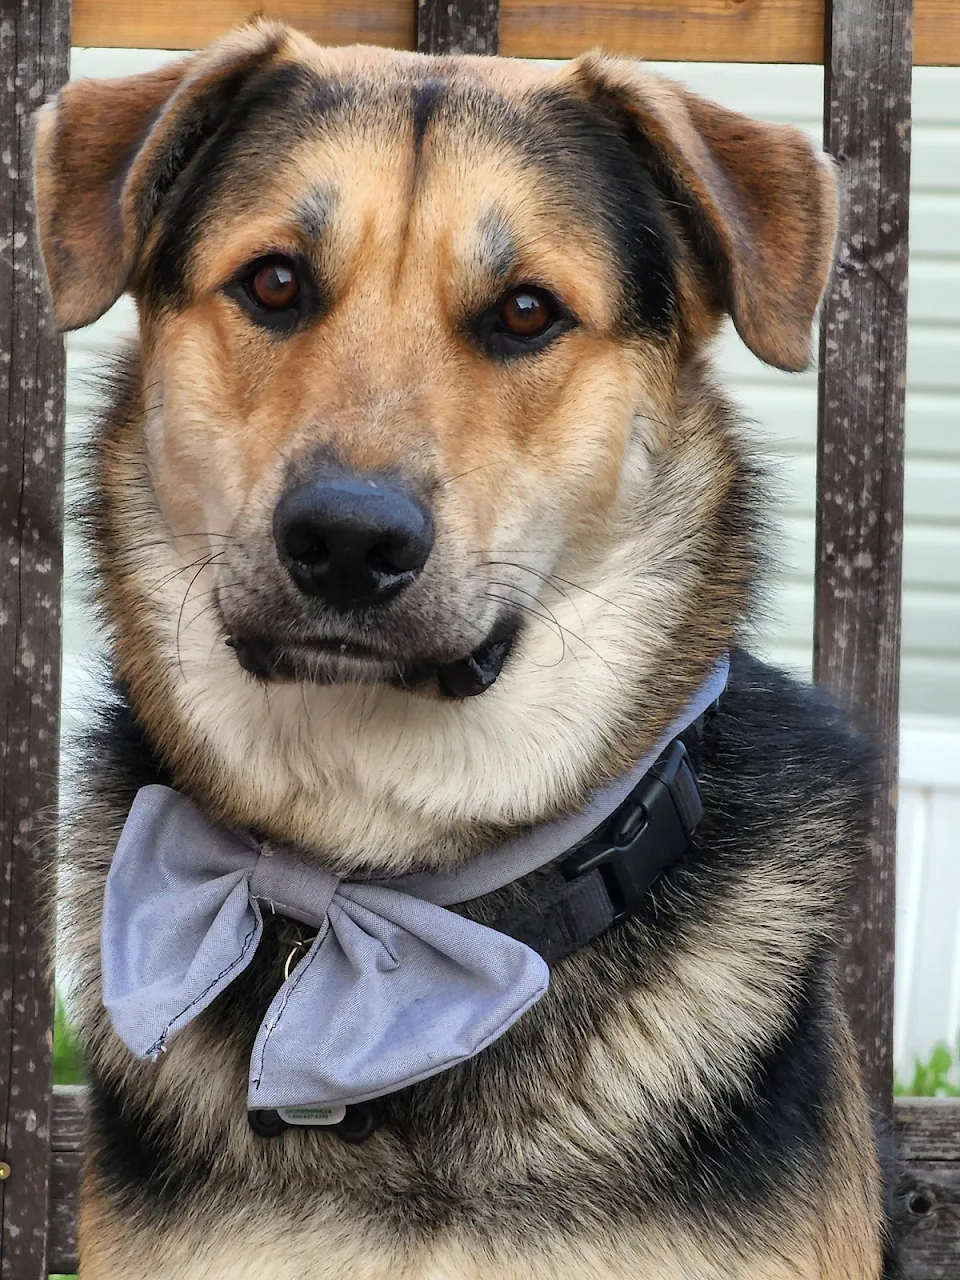 Theodore, looking dapper as heck